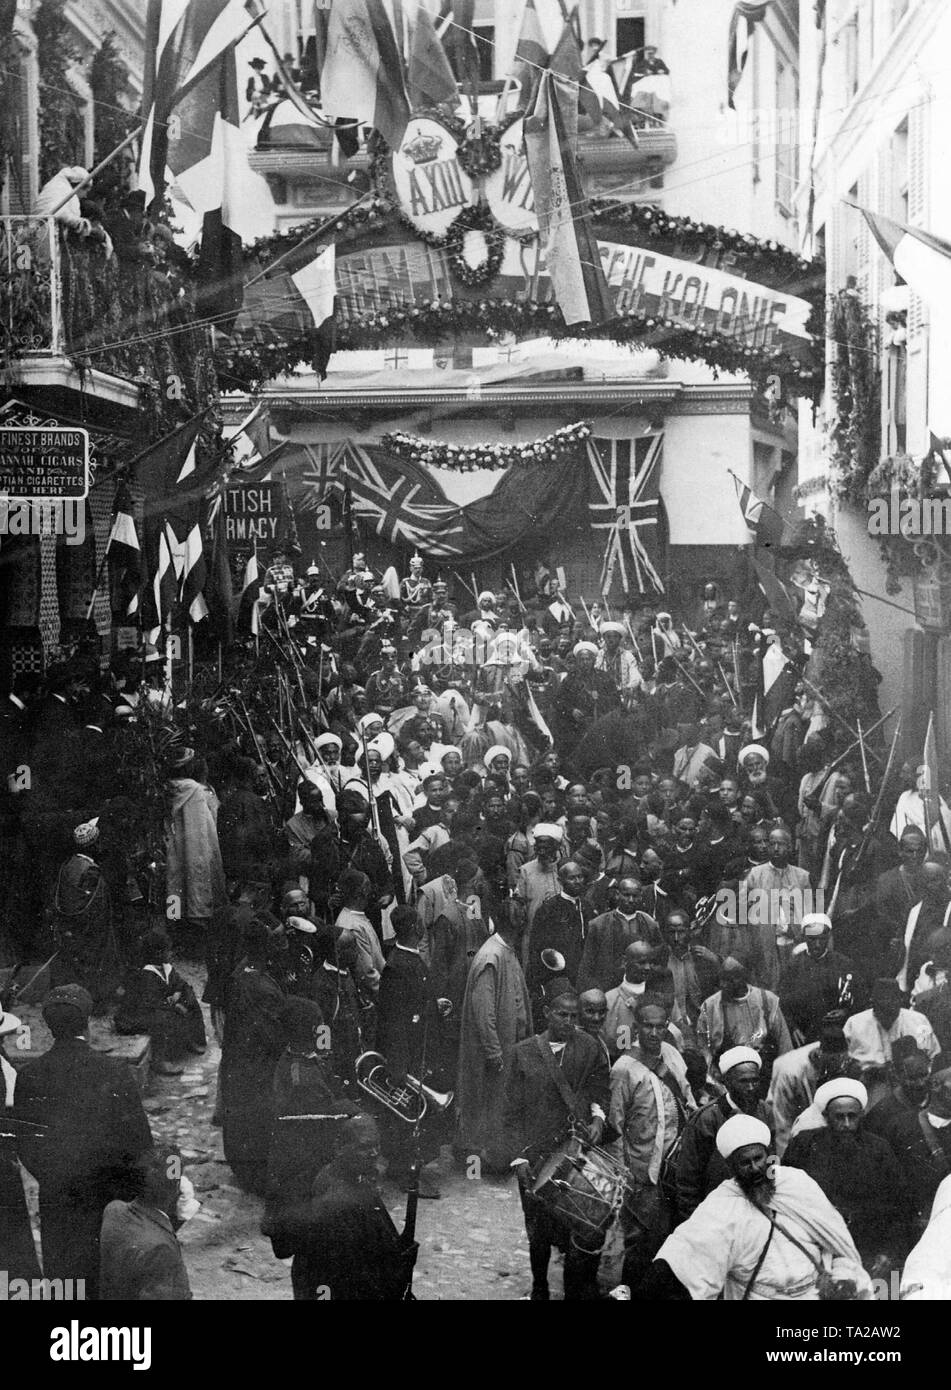 Kaiser William II of Germany during his visit in Tangier, Morocco, 1905. In the foreground, the triumphal arch built by the German colony, in the background the welcome banner of the English inhabitants of Tangier. Stock Photo